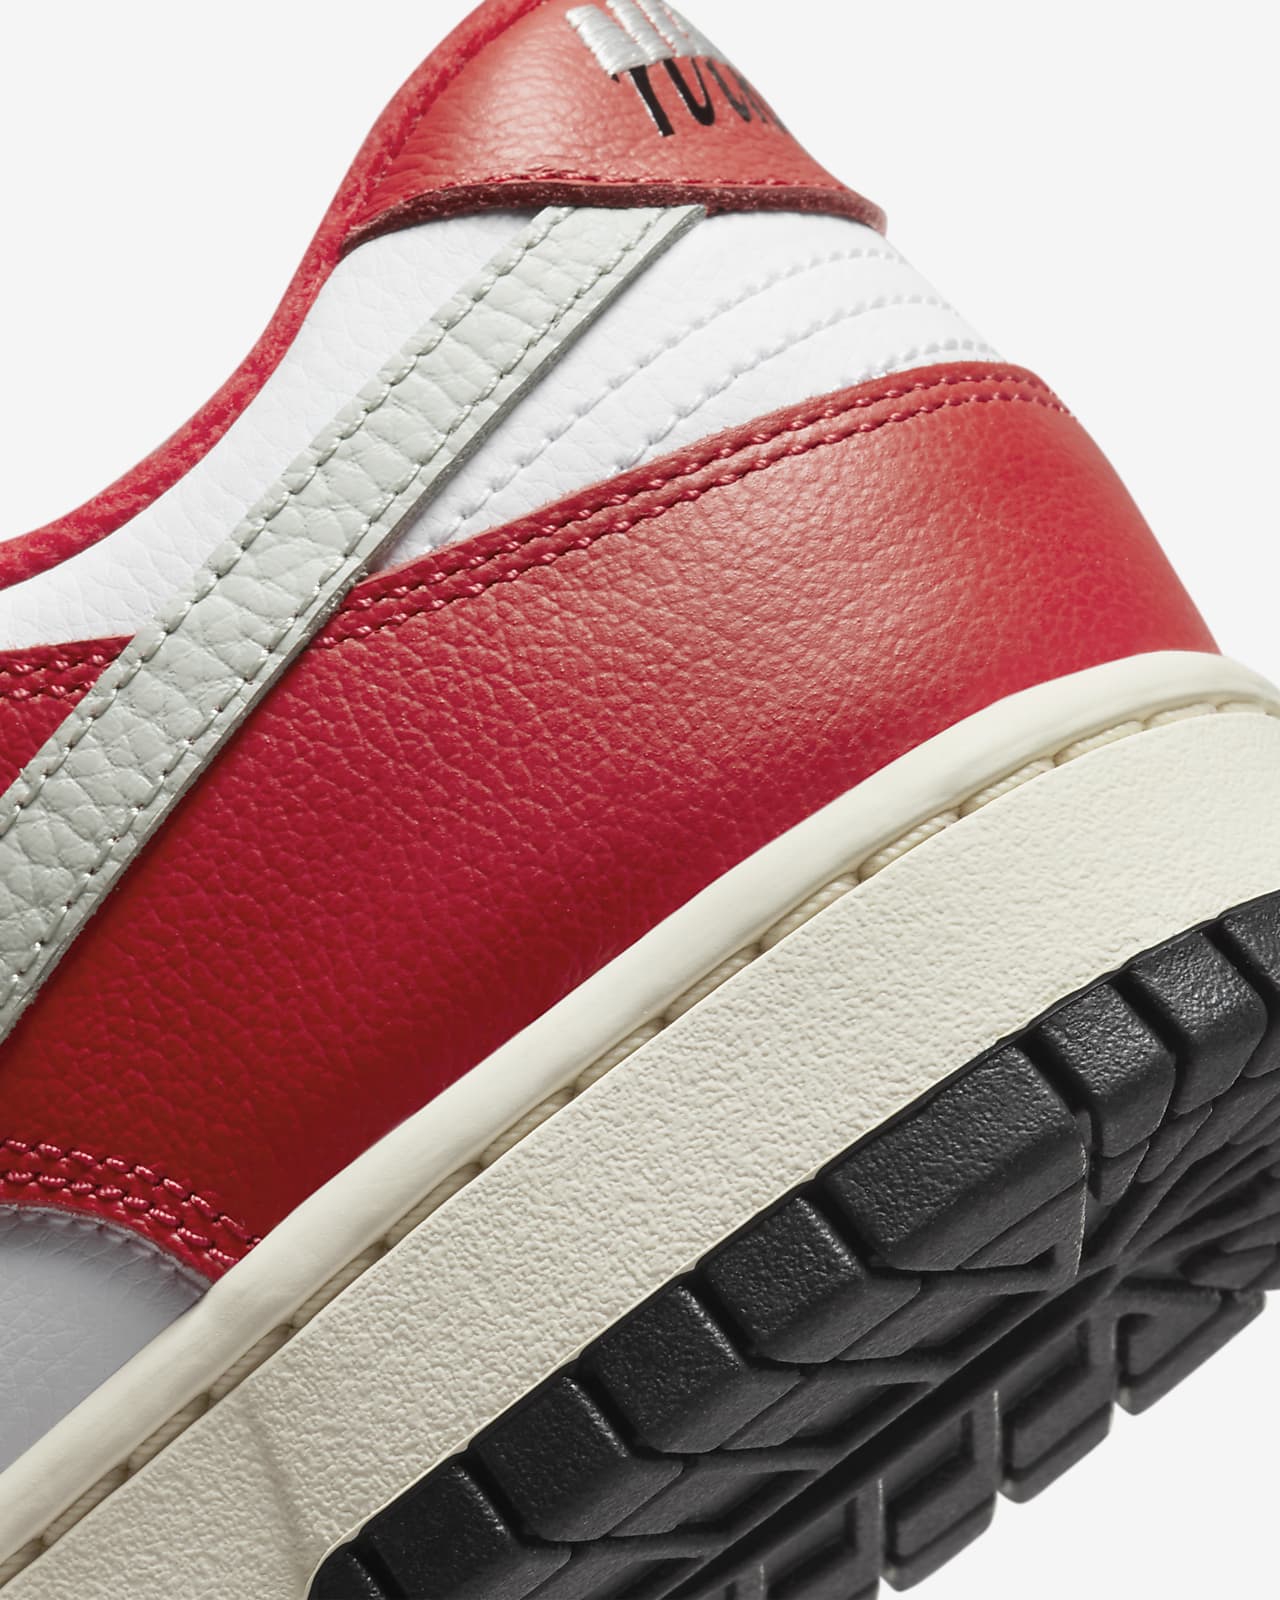 Nike Dunk Low Pro IW University Red Review